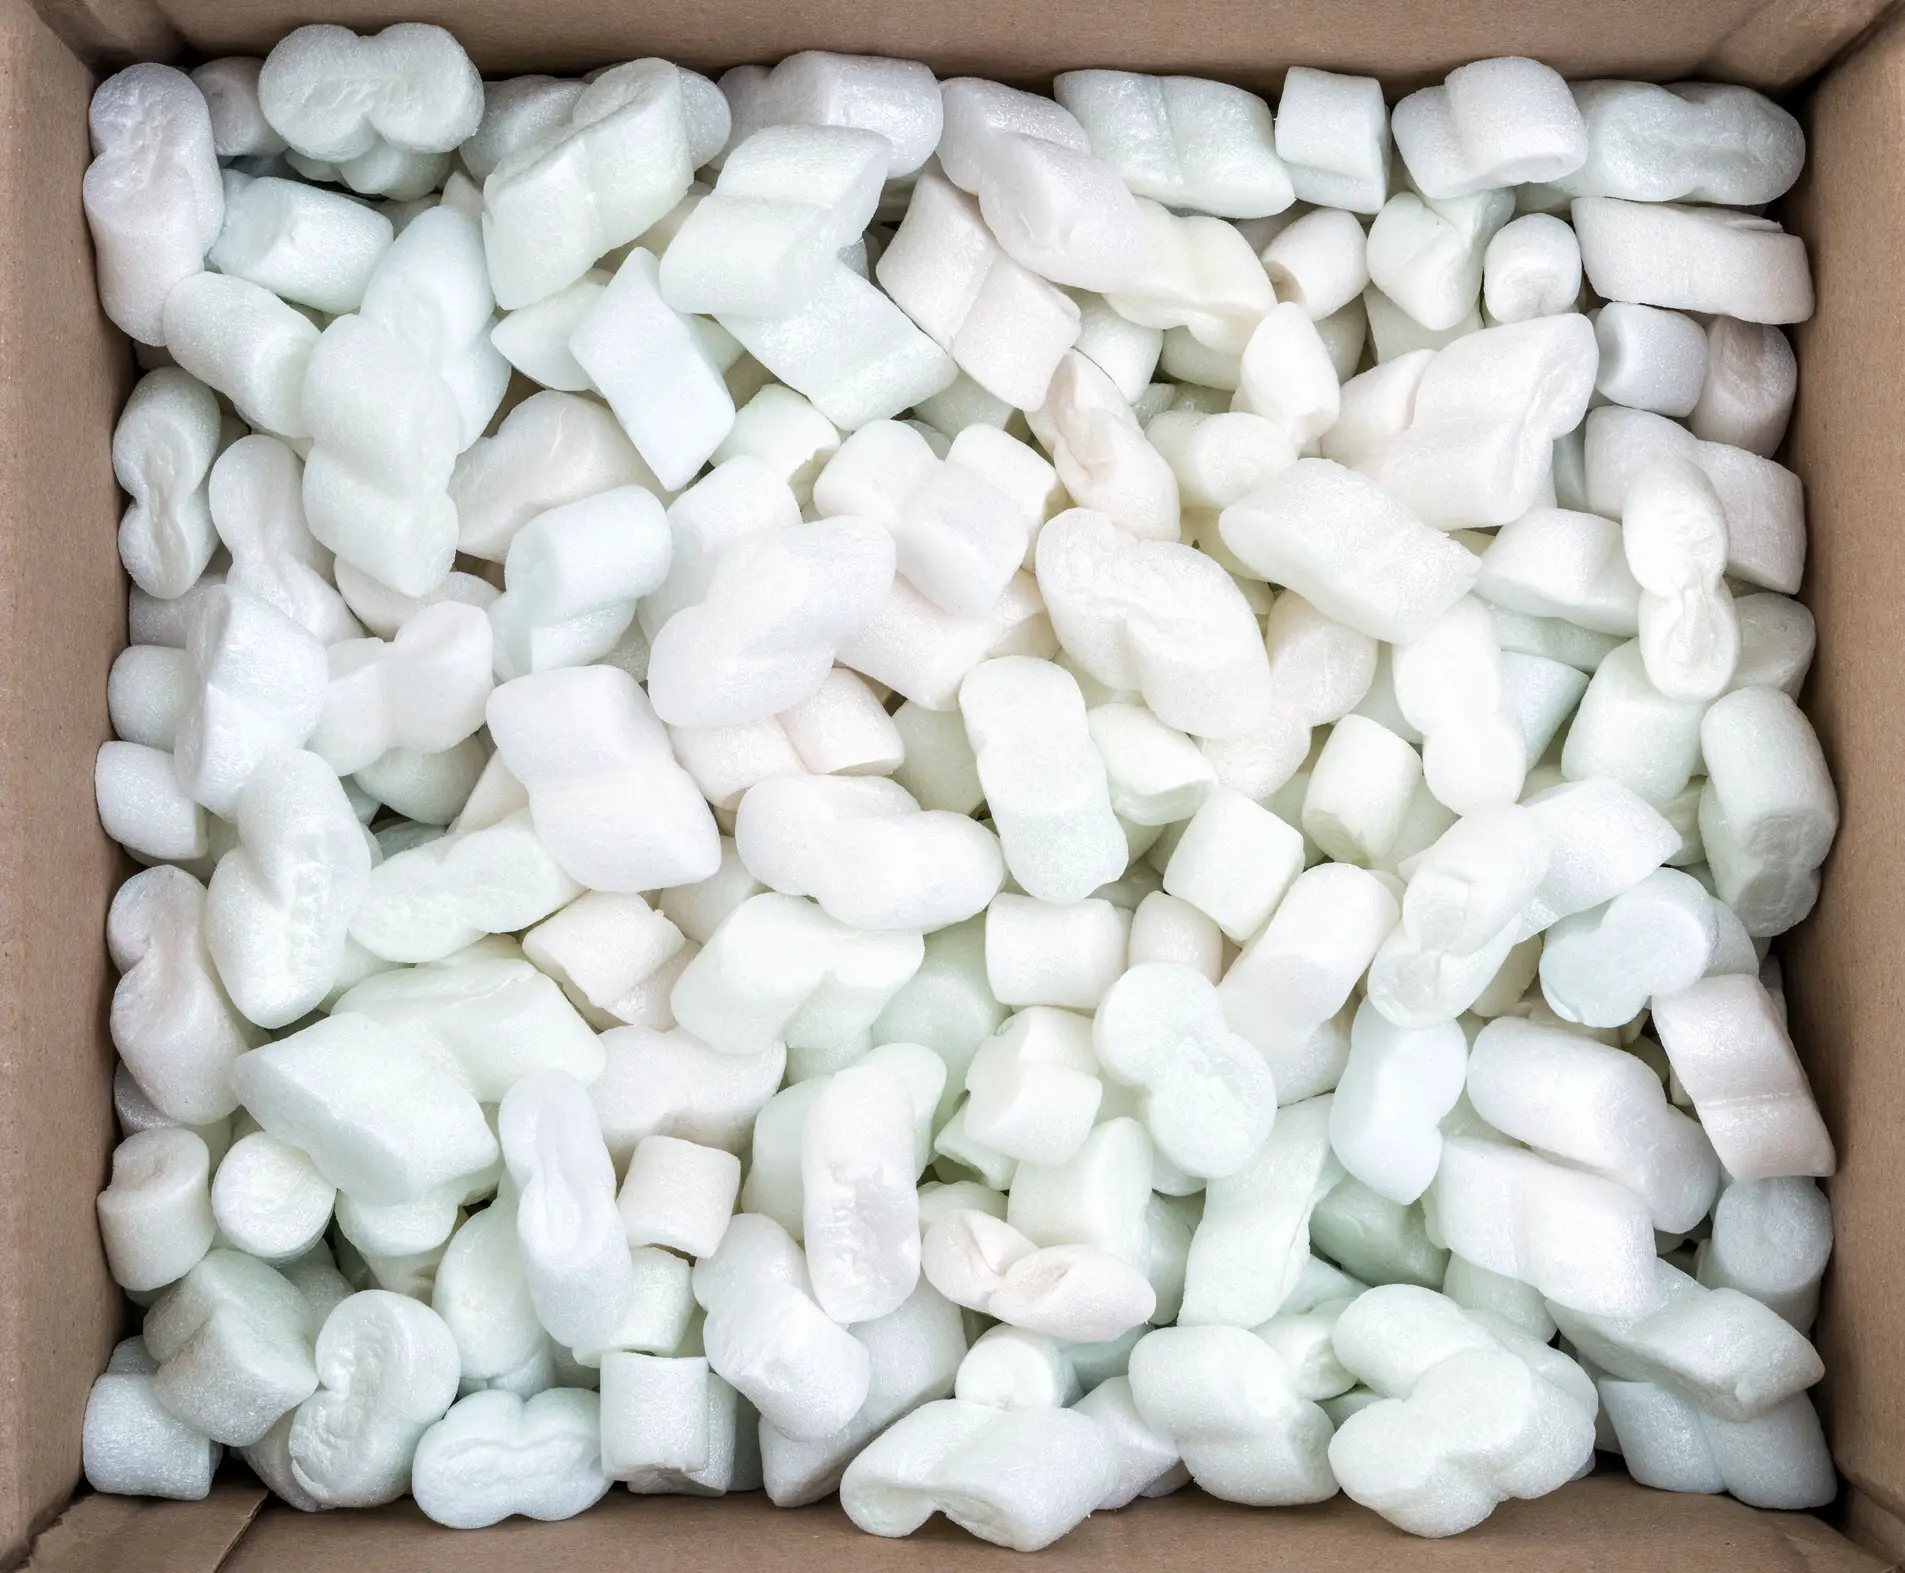 Box filled with polystyrene